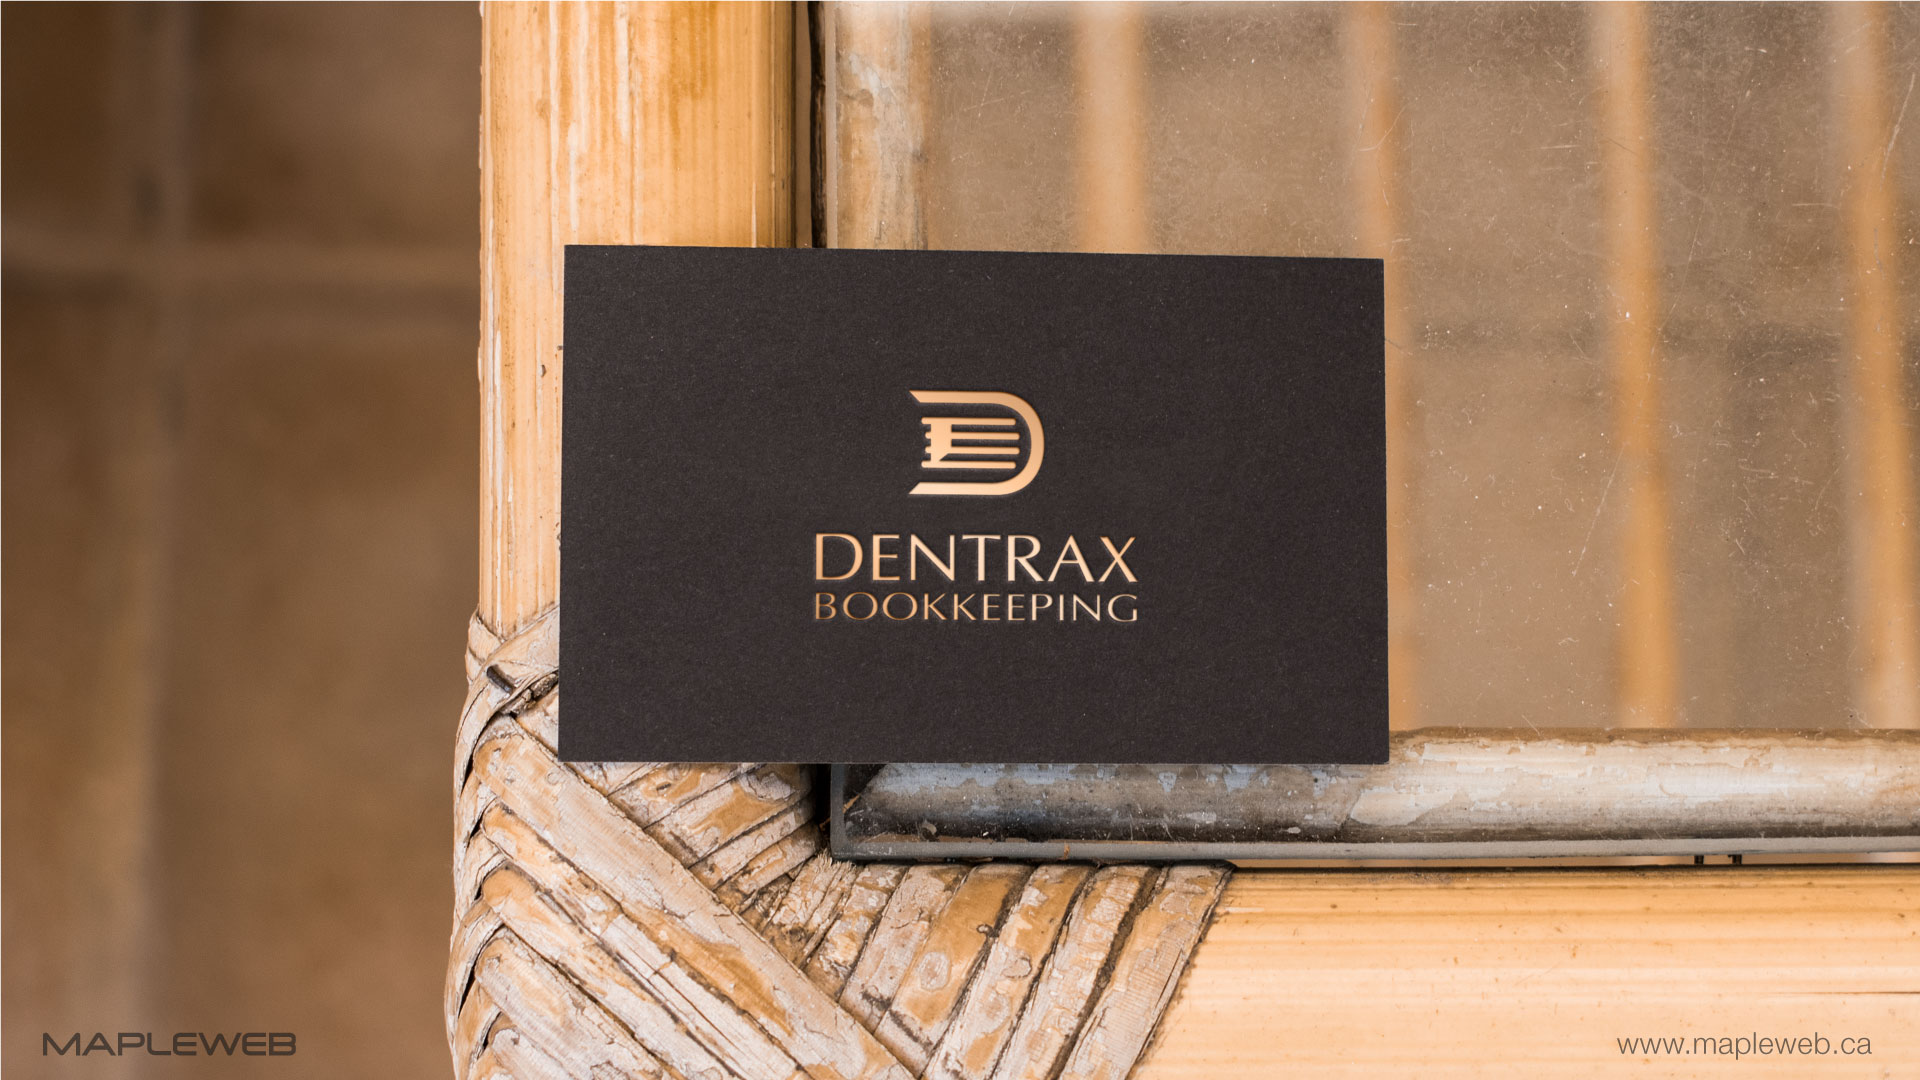 dentraxbookkeeping-brand-logo-design-by-mapleweb-vancouver-canada-black-business-card-mock